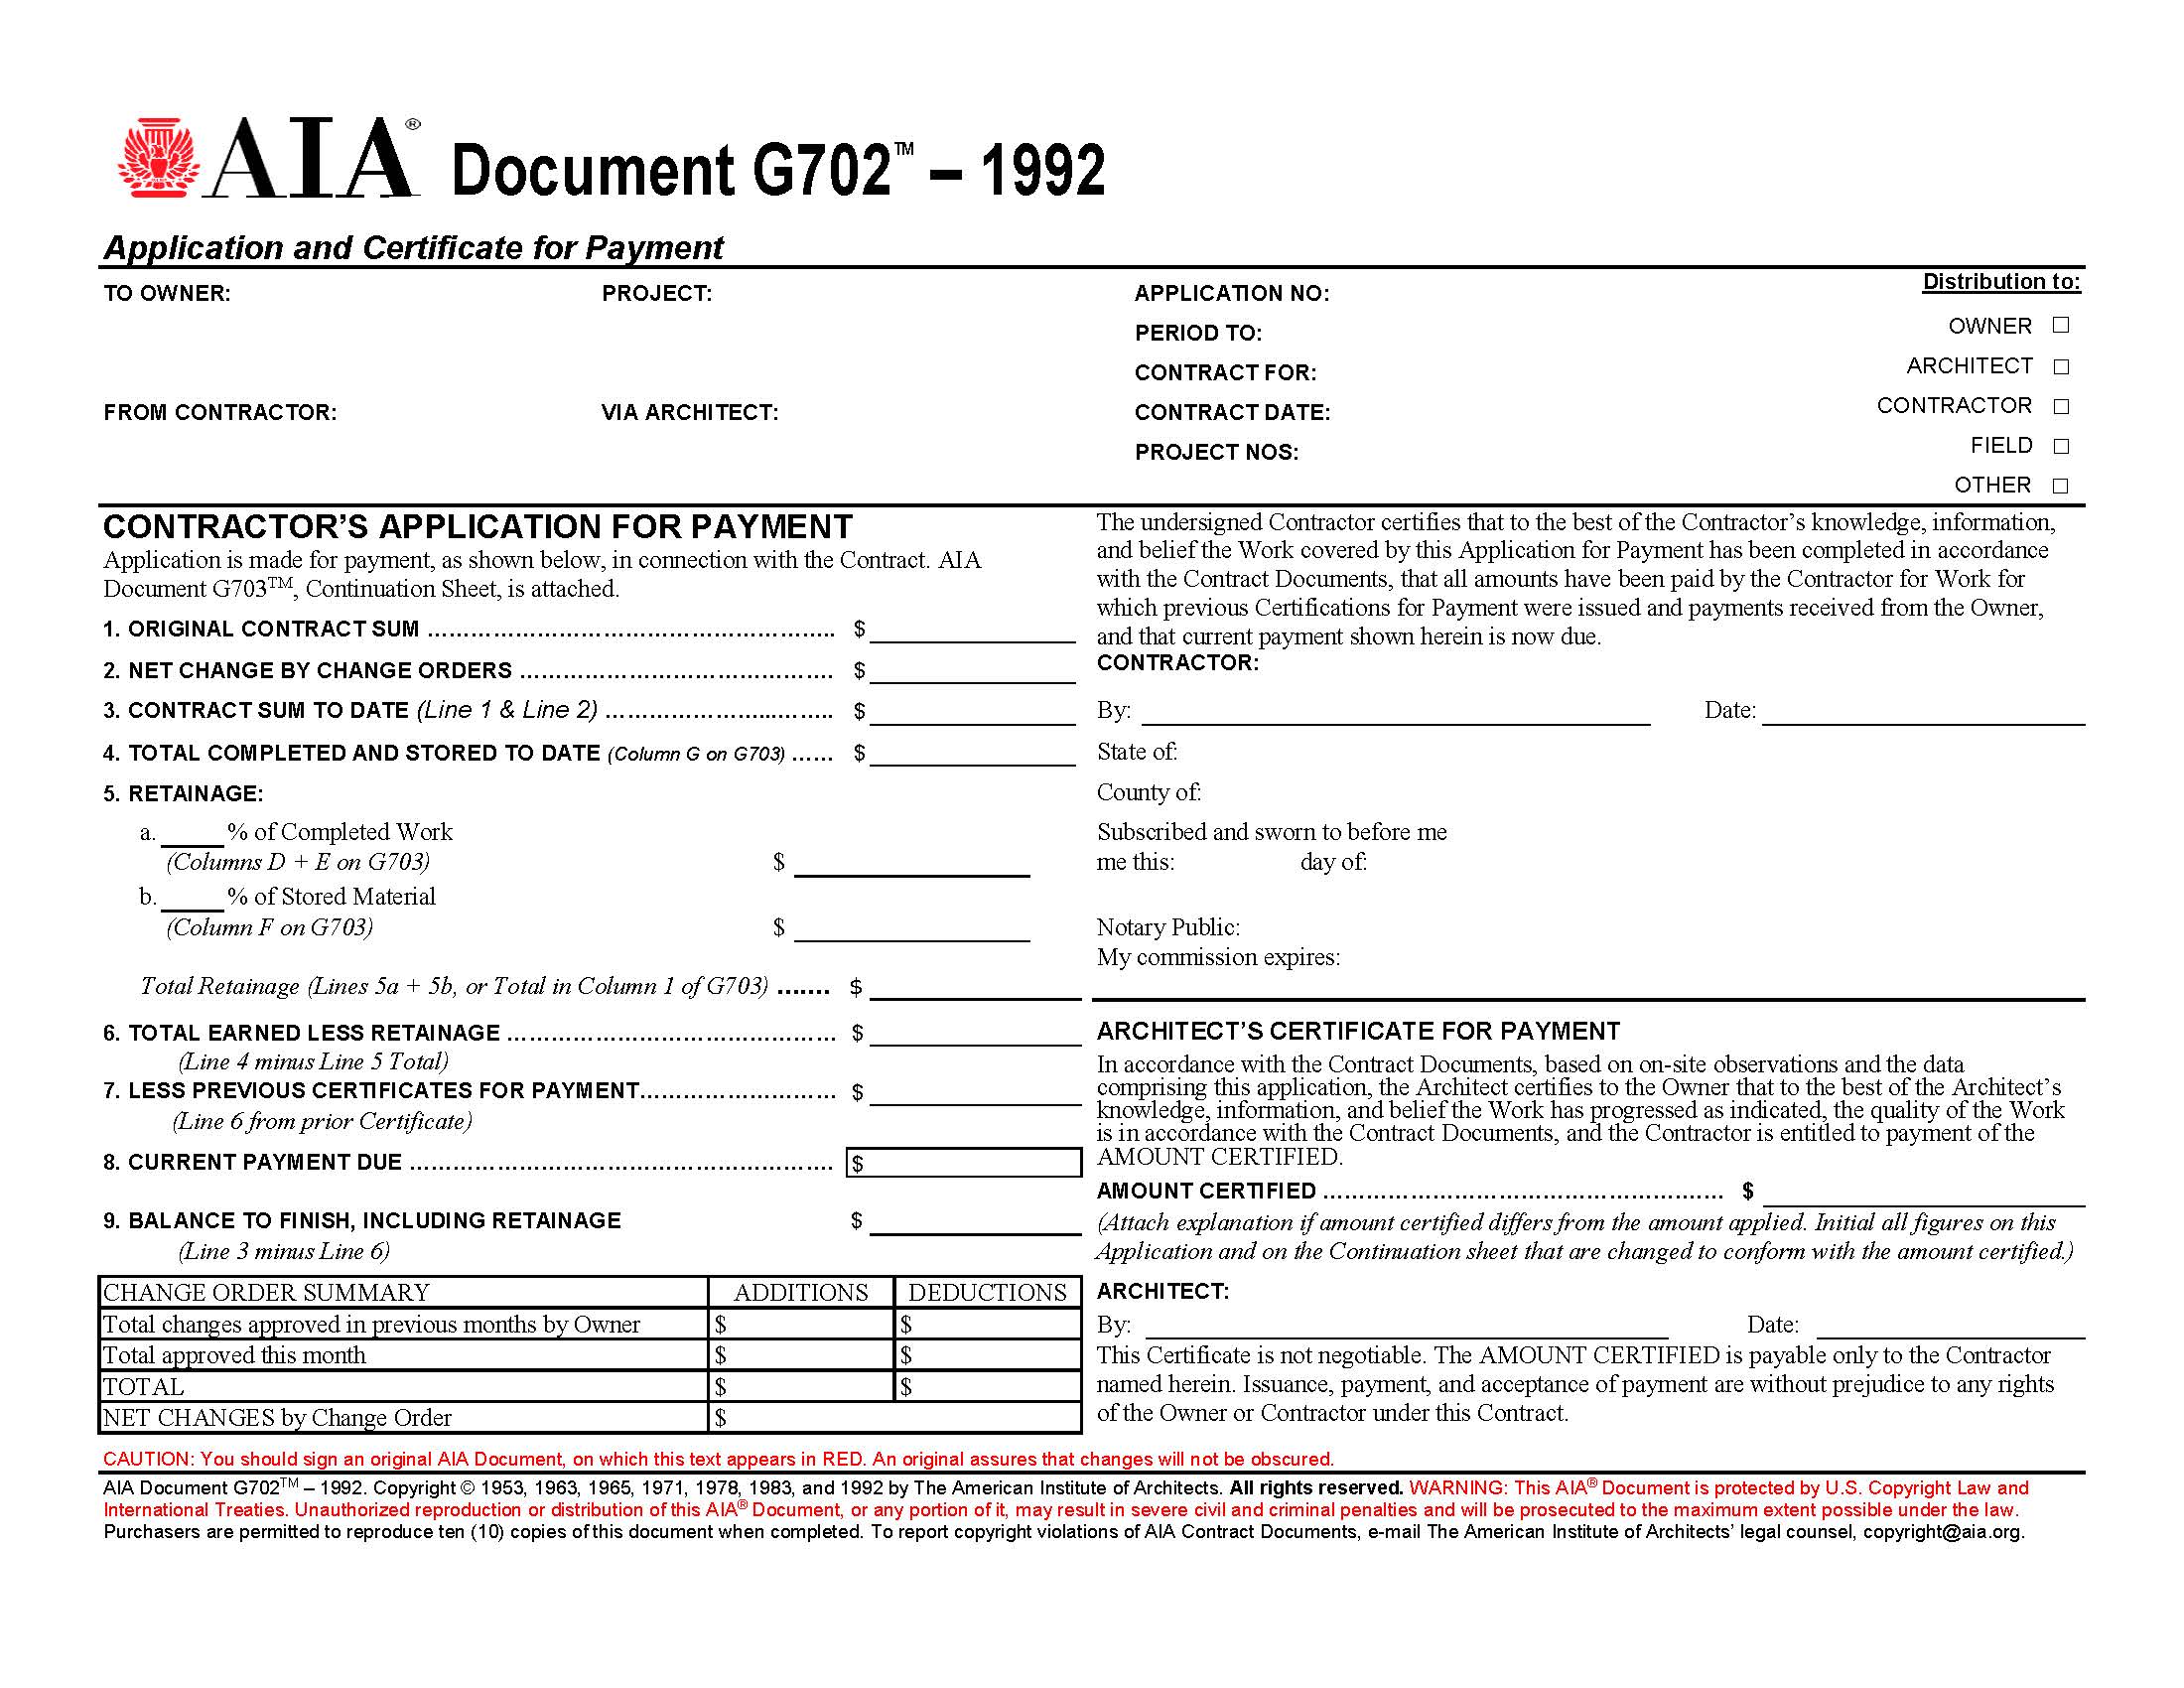 AIA Forms G702 & G703 Application, Certificate, and Continuation